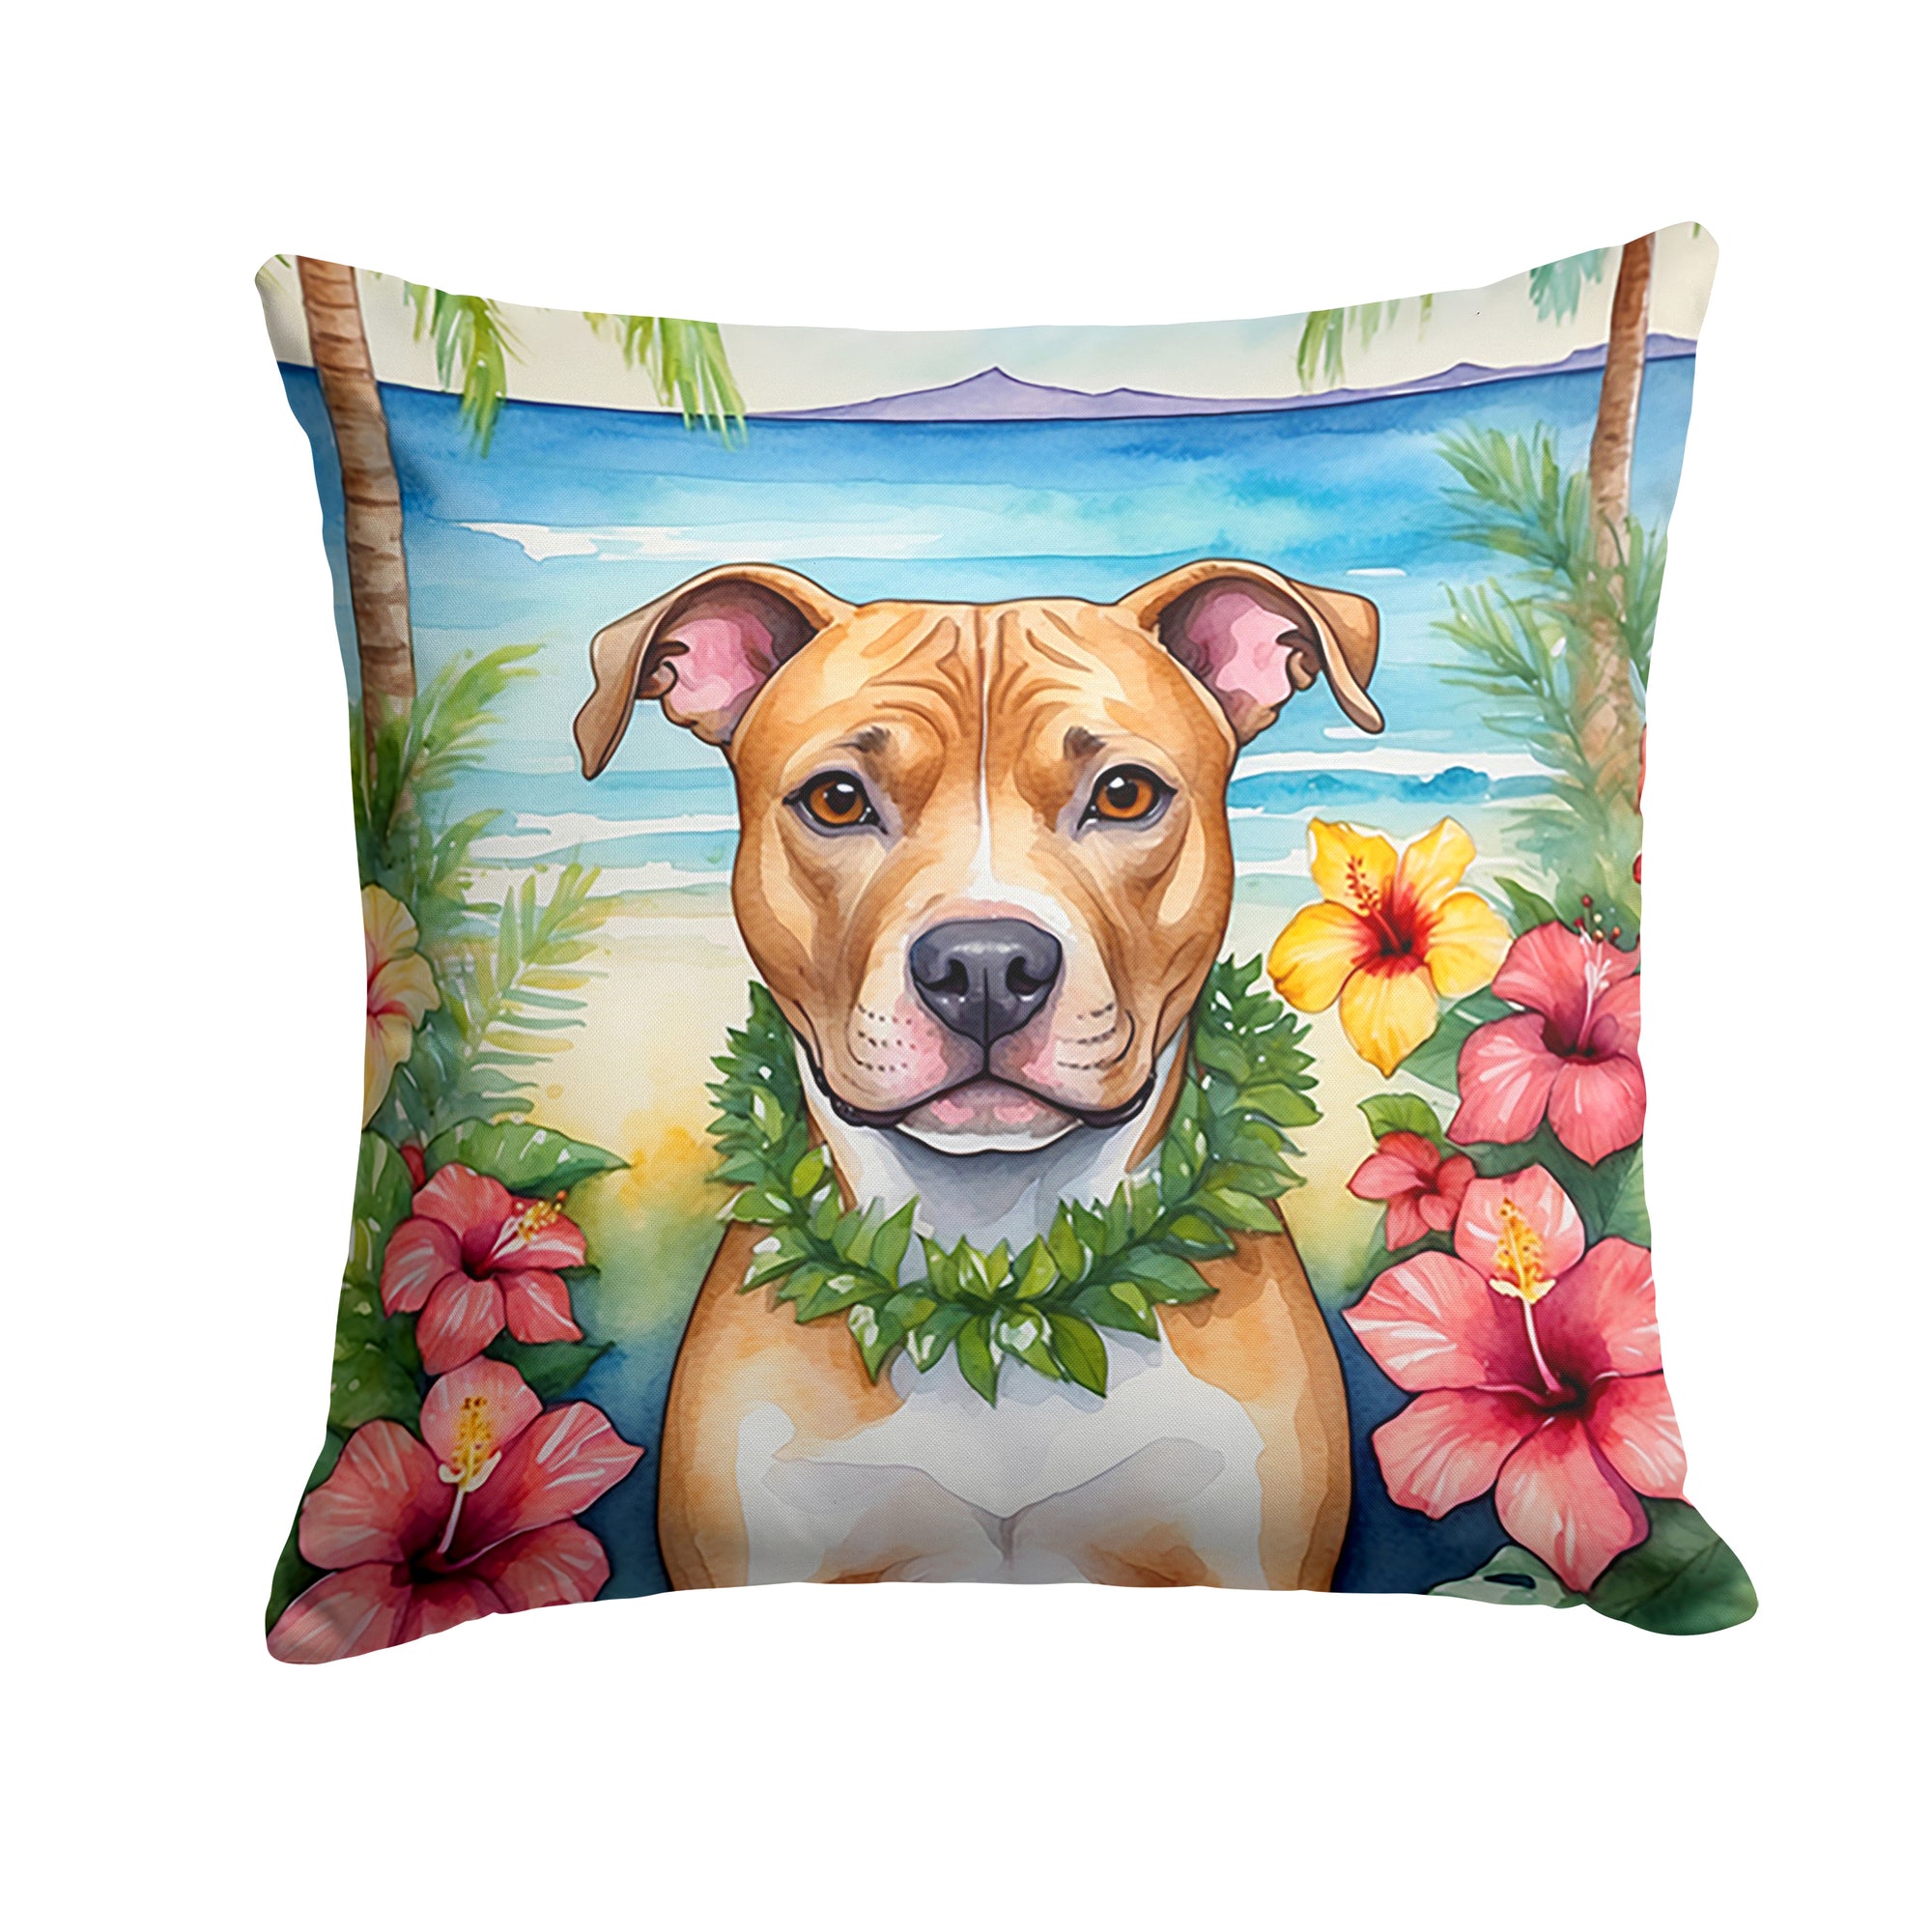 Buy this Pit Bull Terrier Luau Throw Pillow